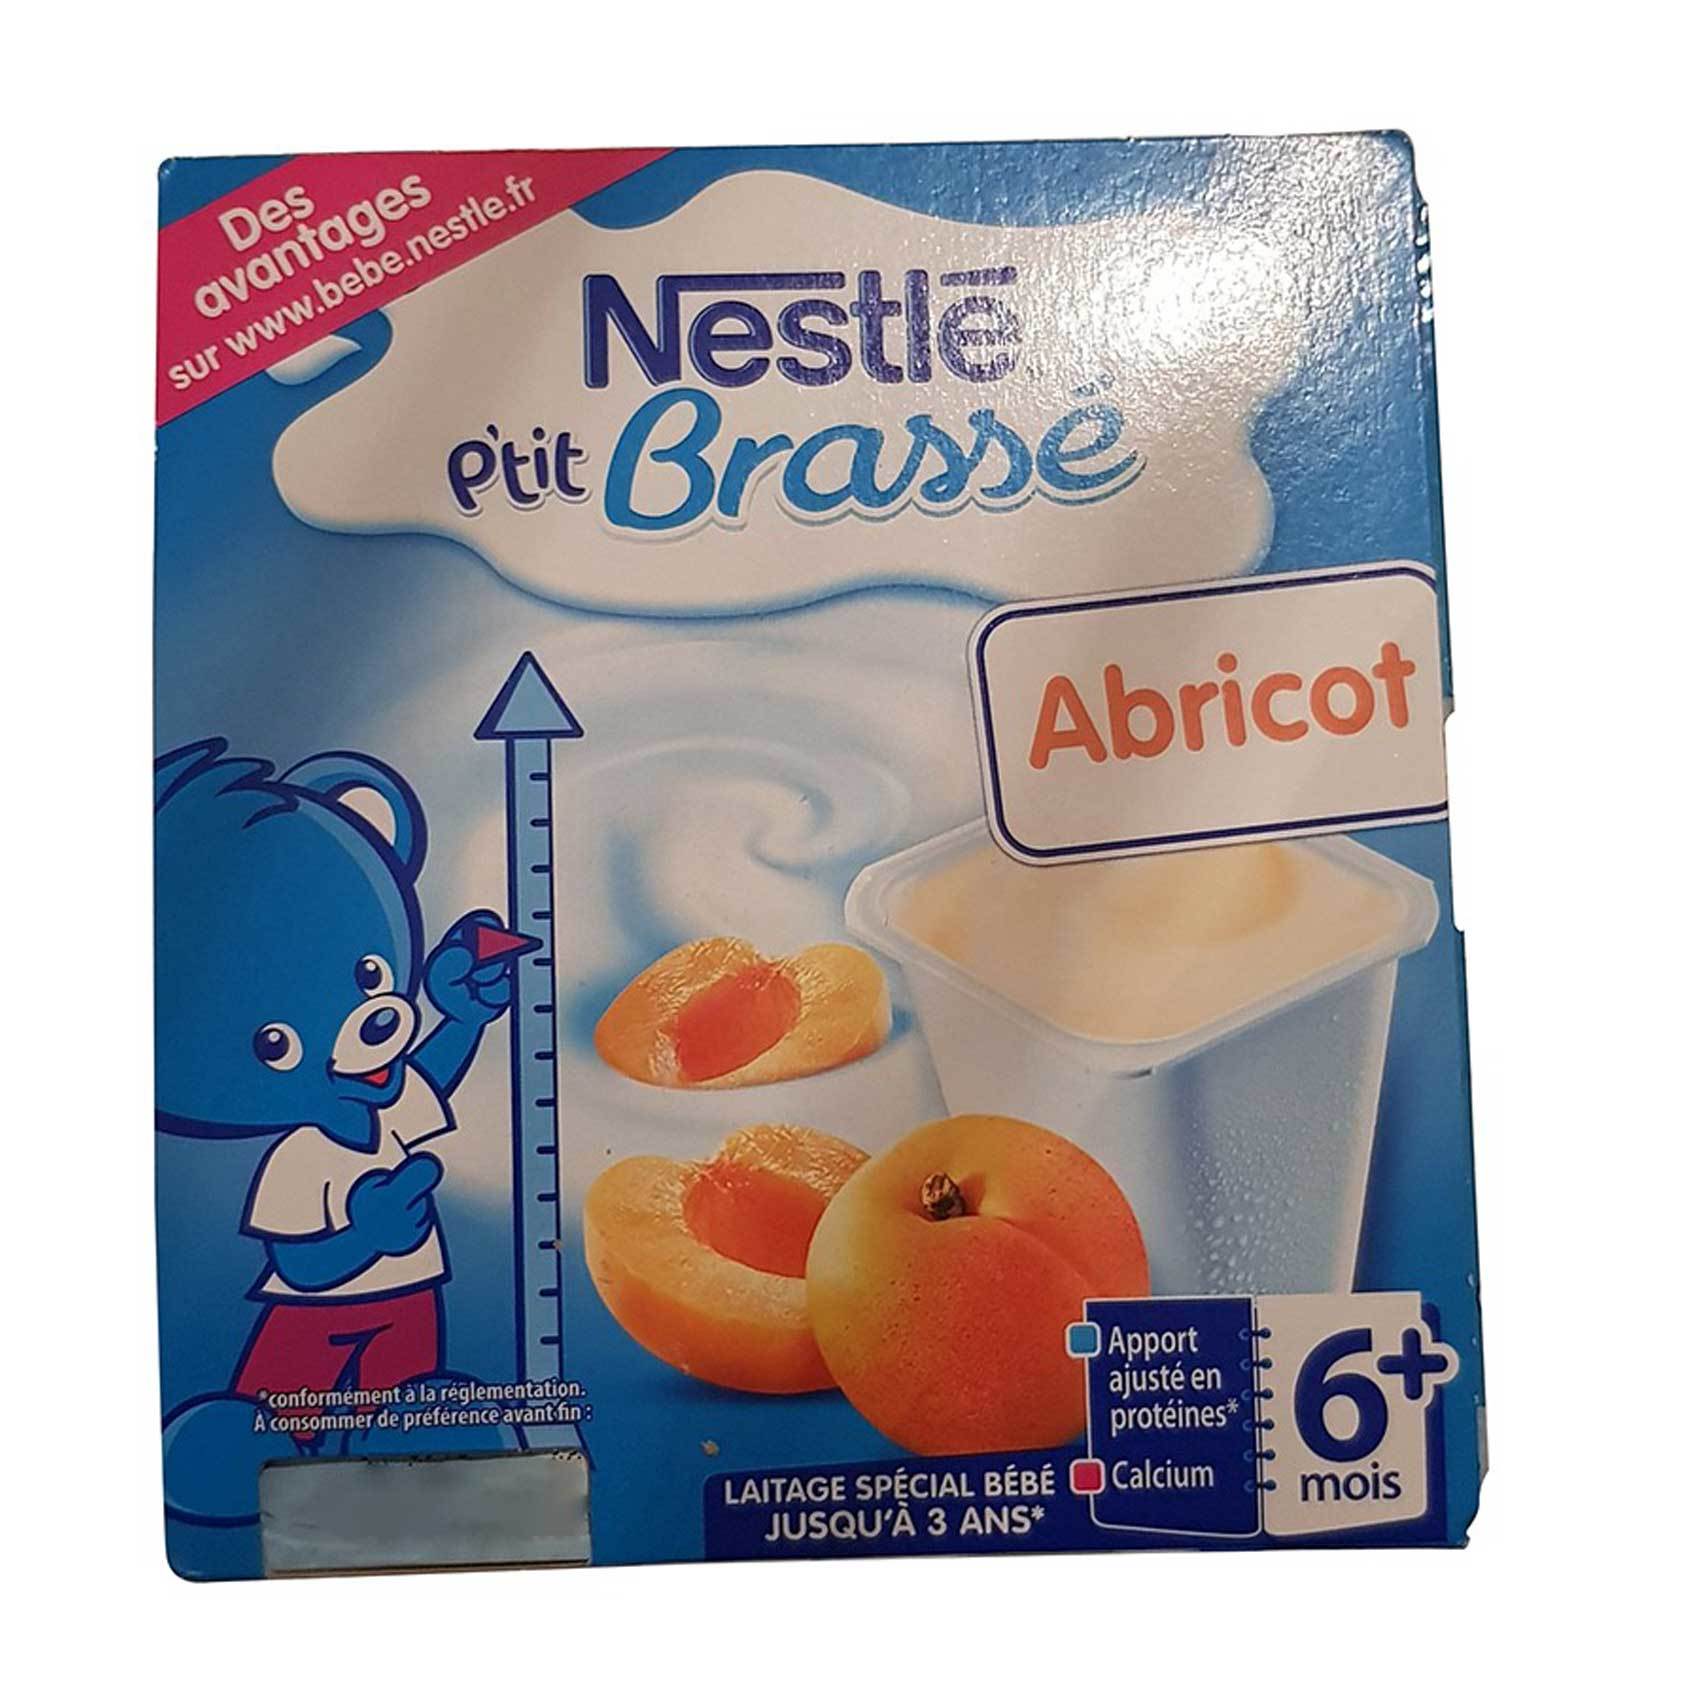 Buy Nestle Abricot Ptit Brasse 100g X Pack Of 4 Online Shop Baby Products On Carrefour Uae